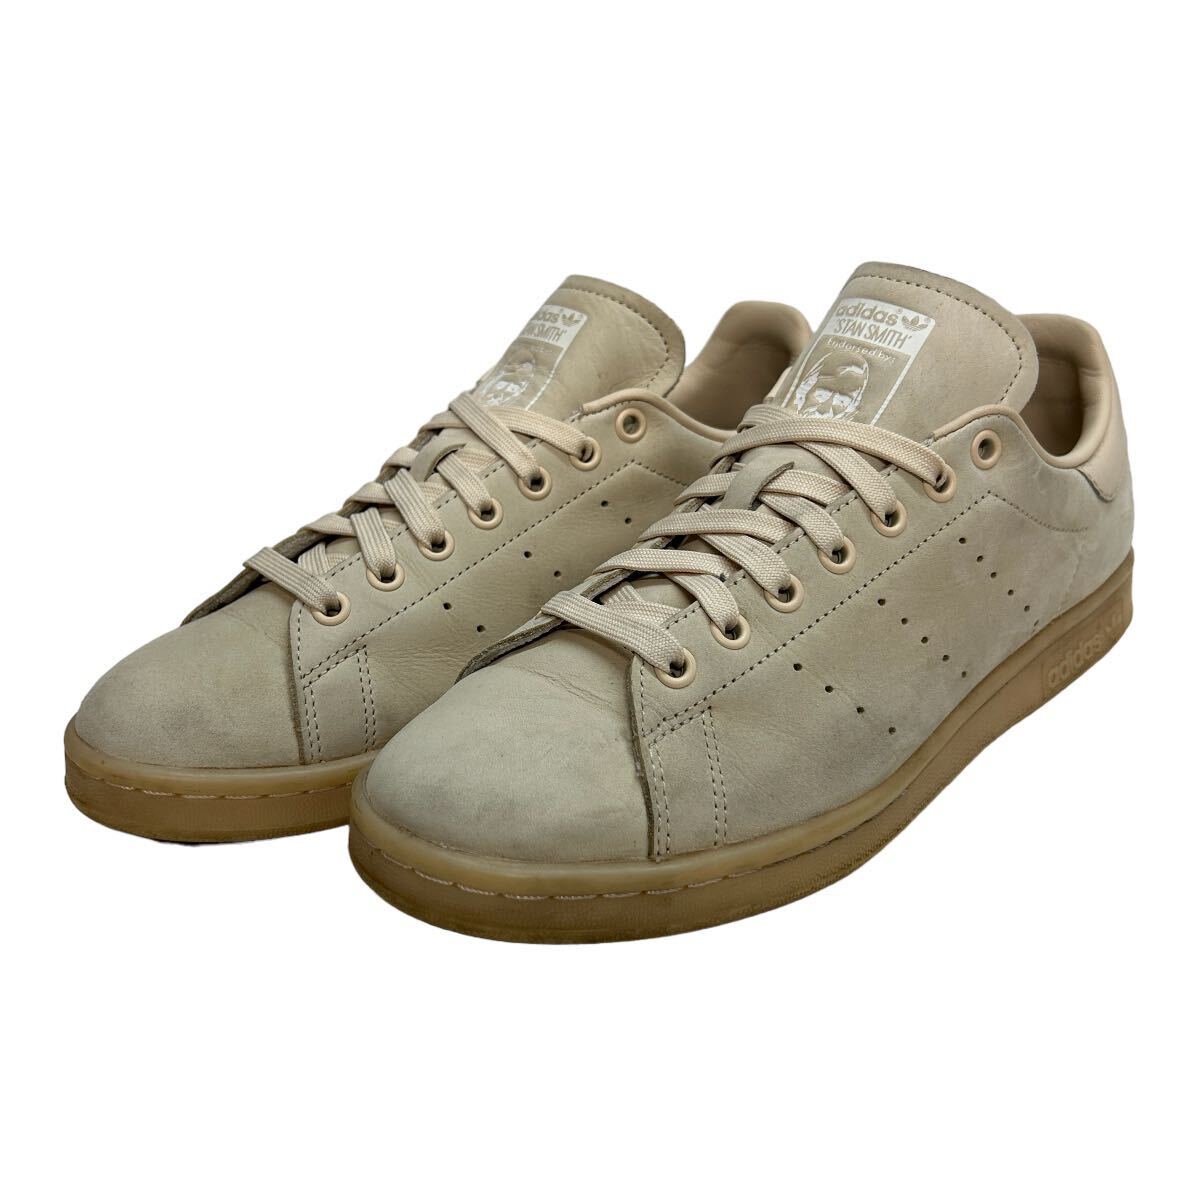 C424B adidas Adidas STAN SMITH Stansmith men's low cut sneakers US8.5 26.5cm beige n back style box attaching 